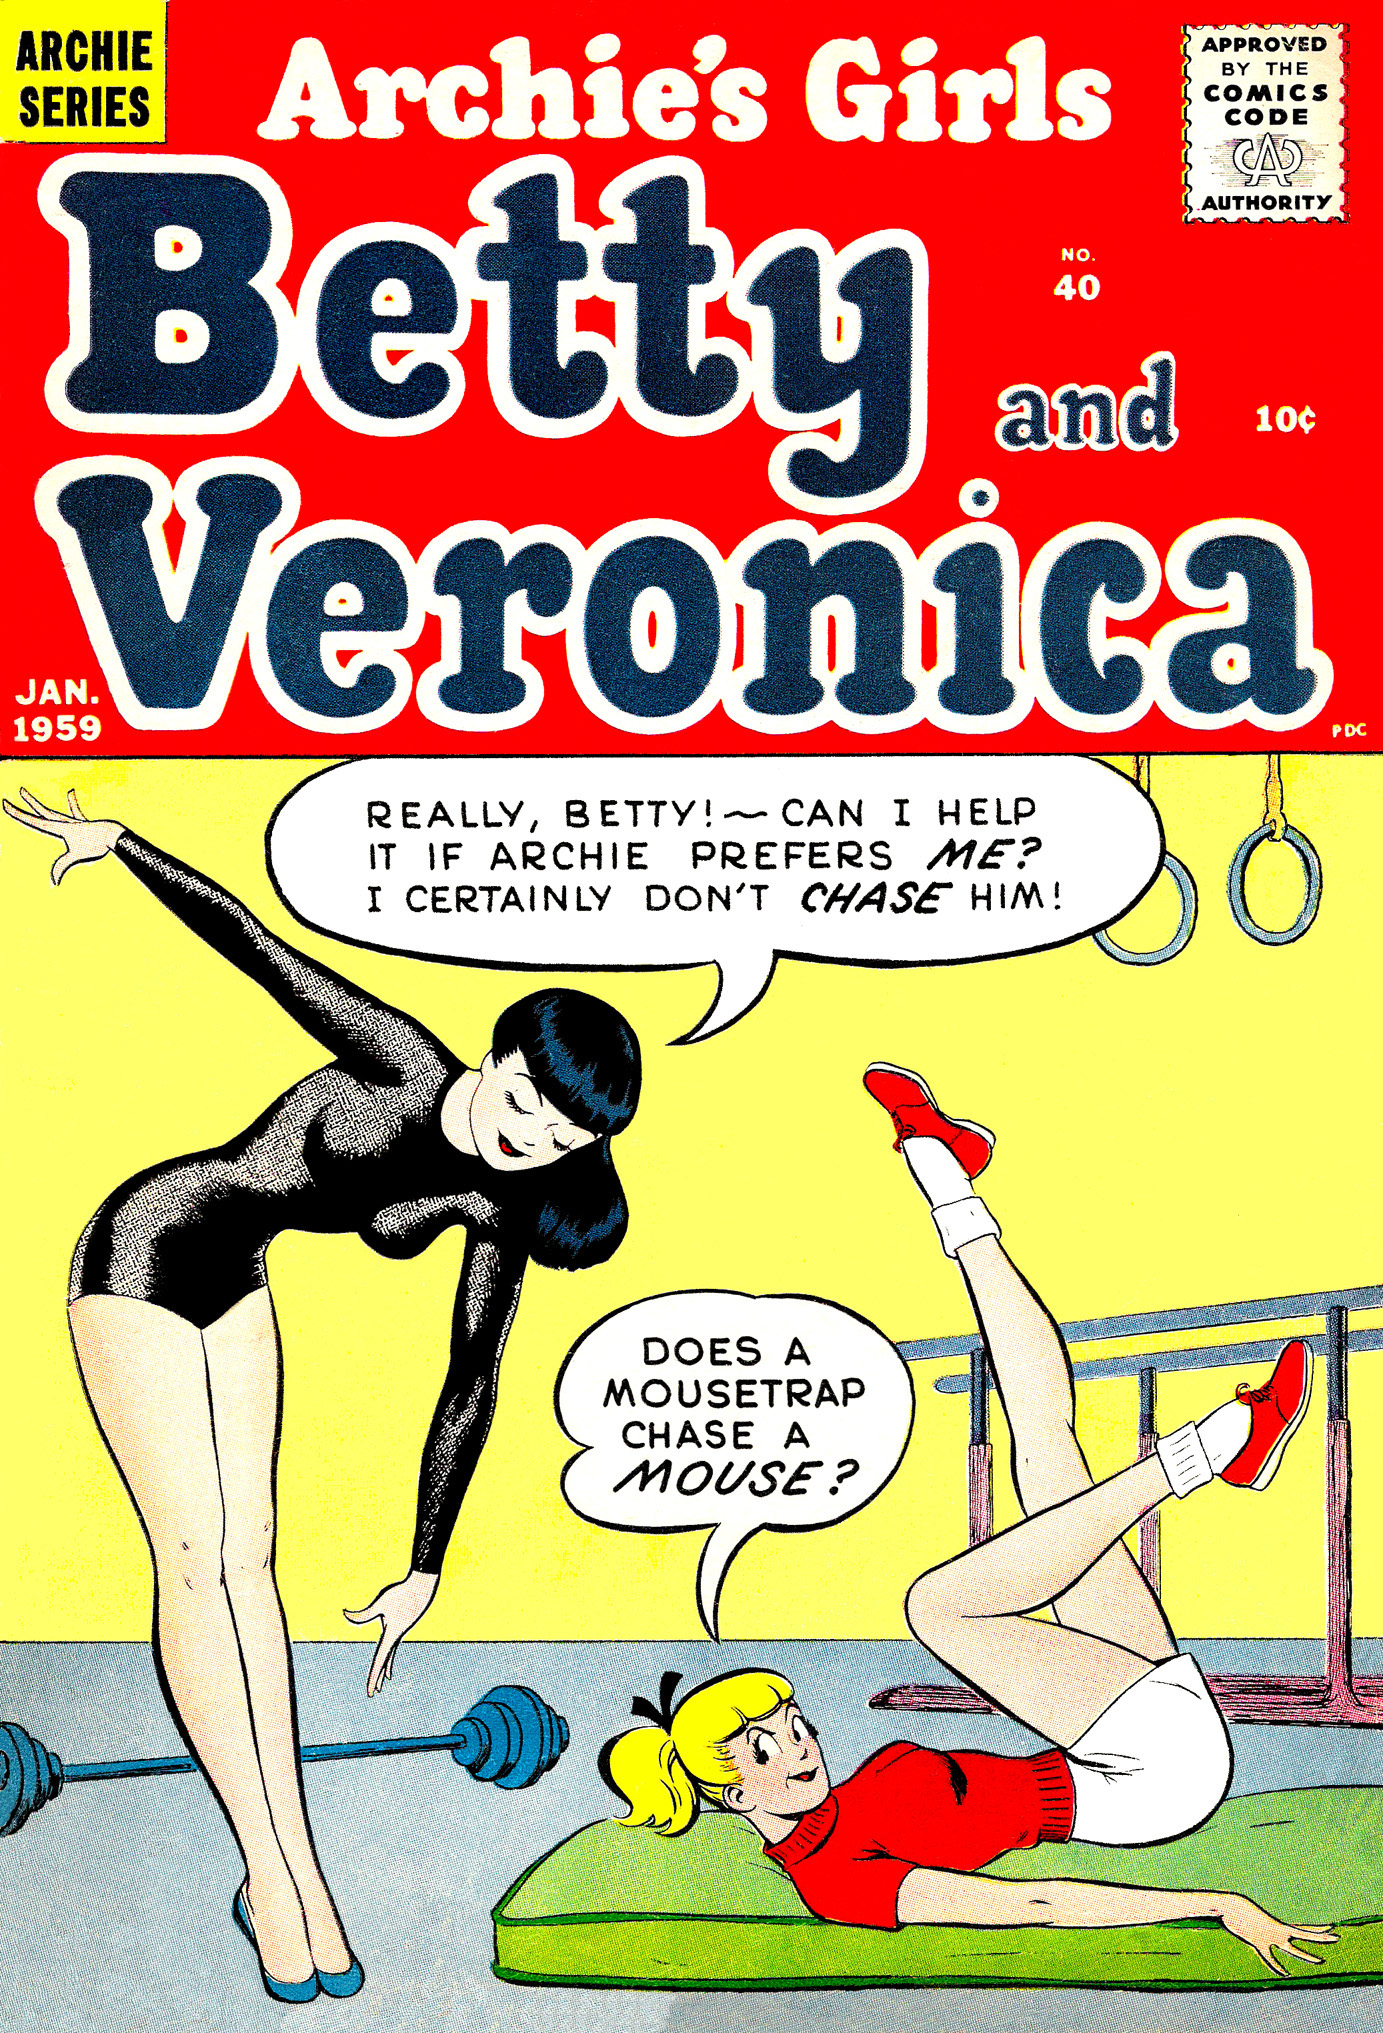 Read online Archie's Girls Betty and Veronica comic -  Issue #40 - 1